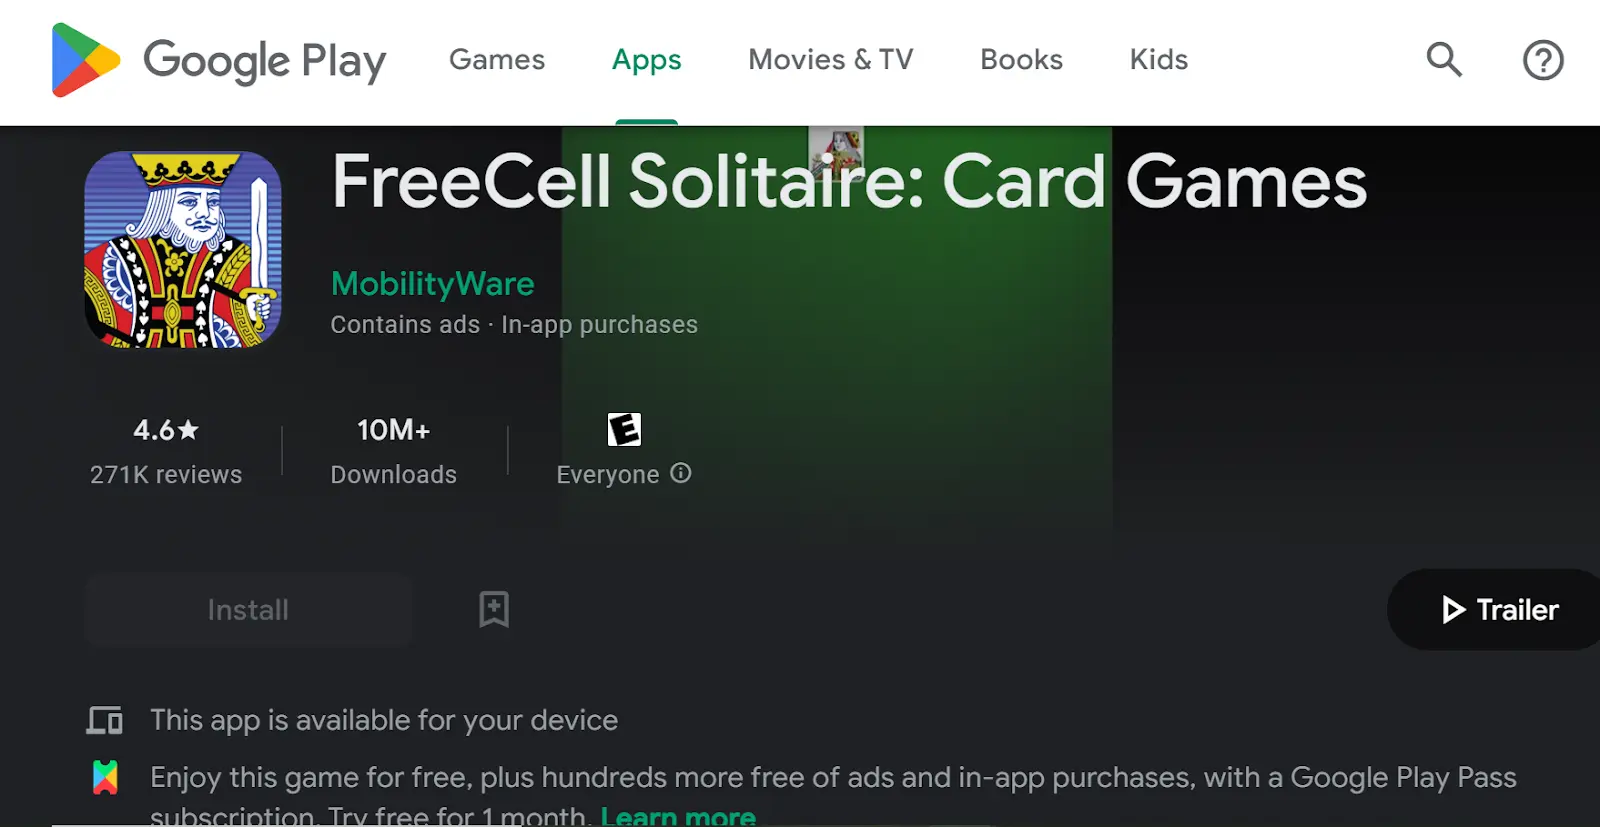 Freecell Solitaire: Card Games